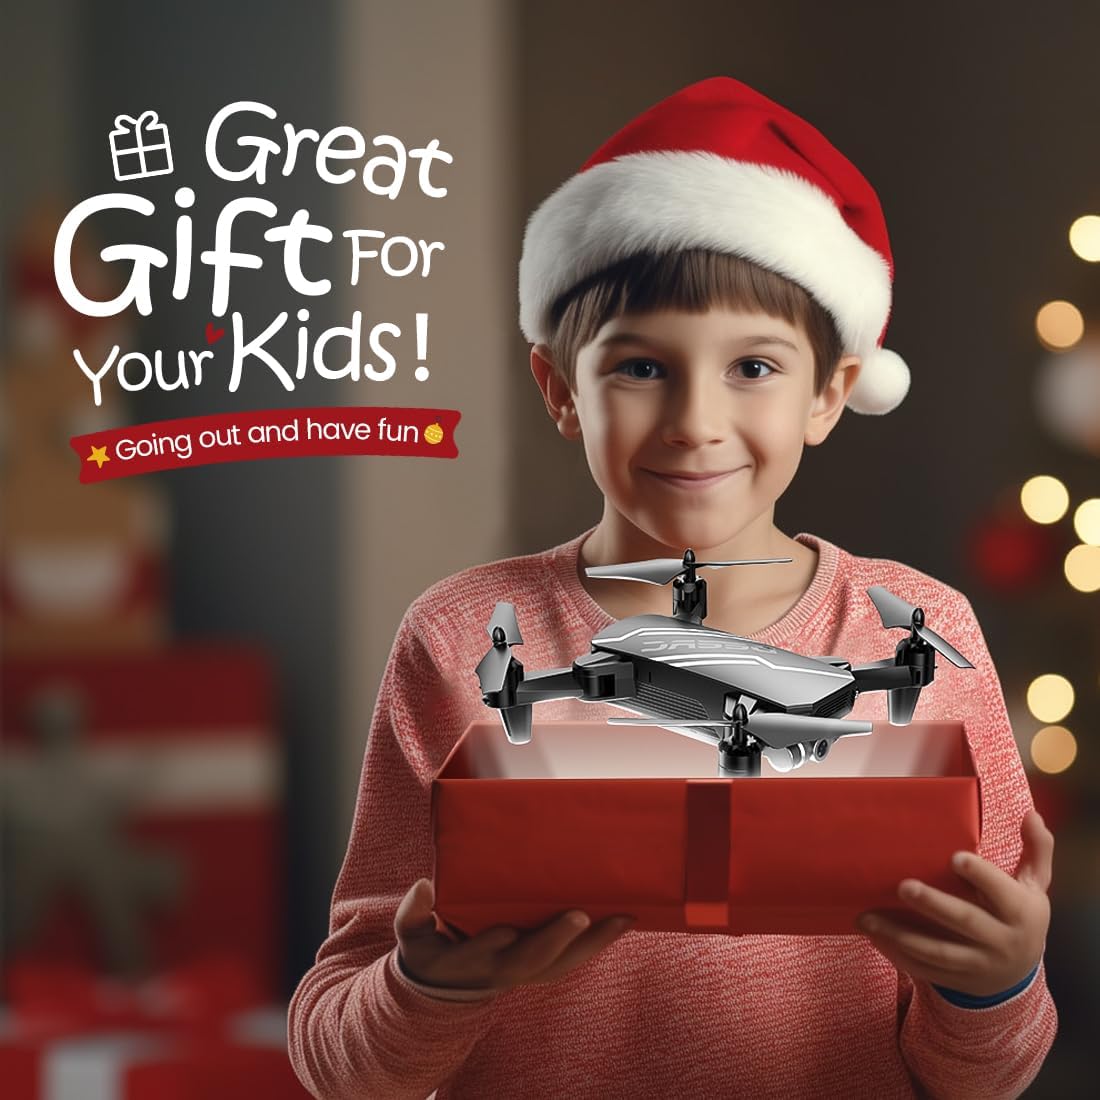 DEERC D20 Mini Drone for Kids with 720P HD FPV Camera - $45